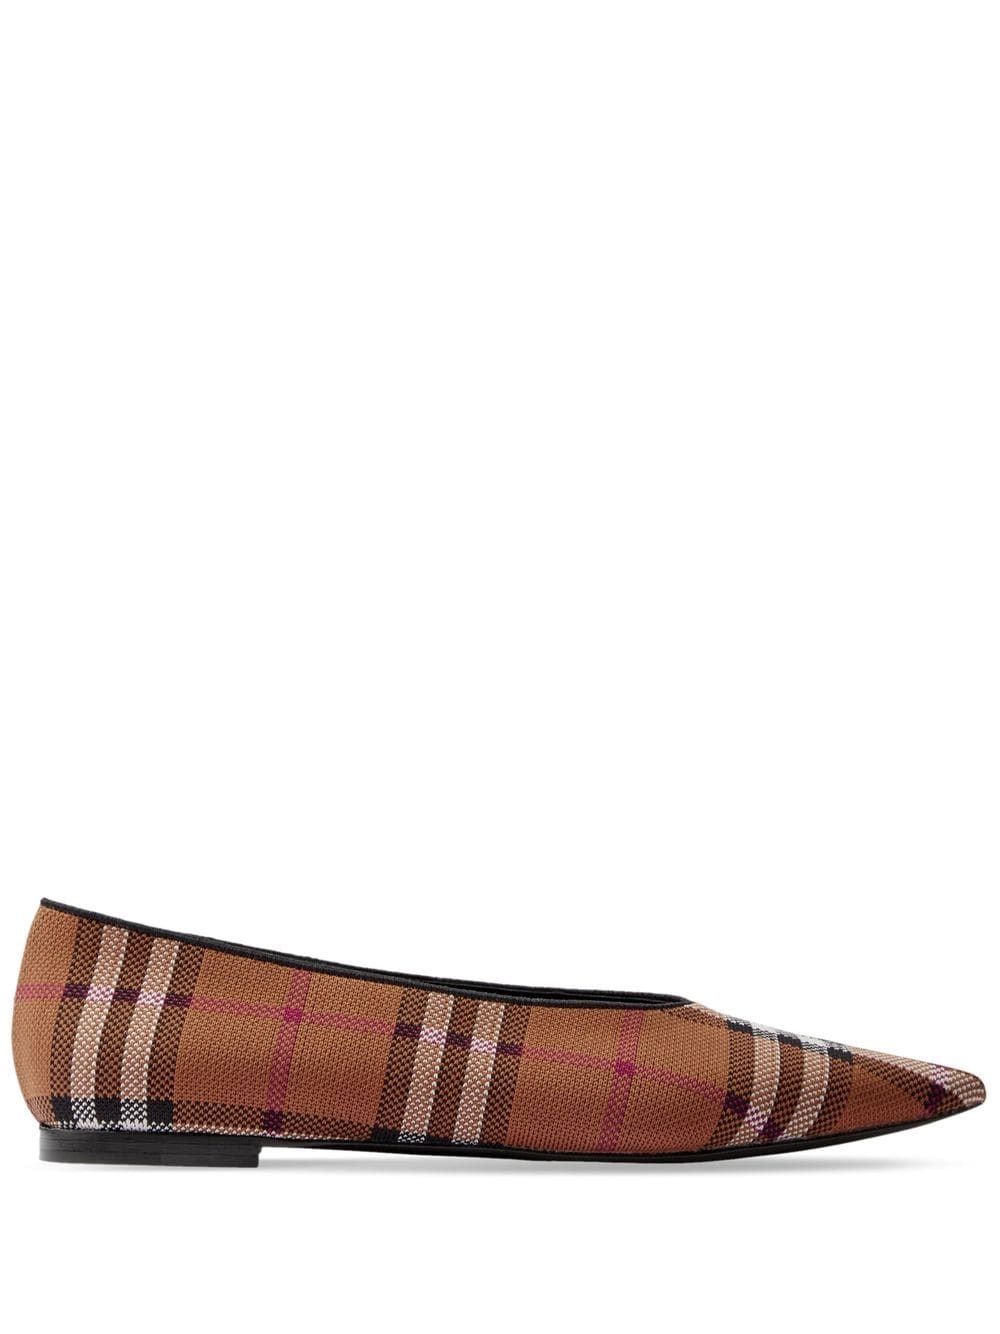 Shop Burberry Vintage-check Pointed-toe Ballerina Shoes In Braun